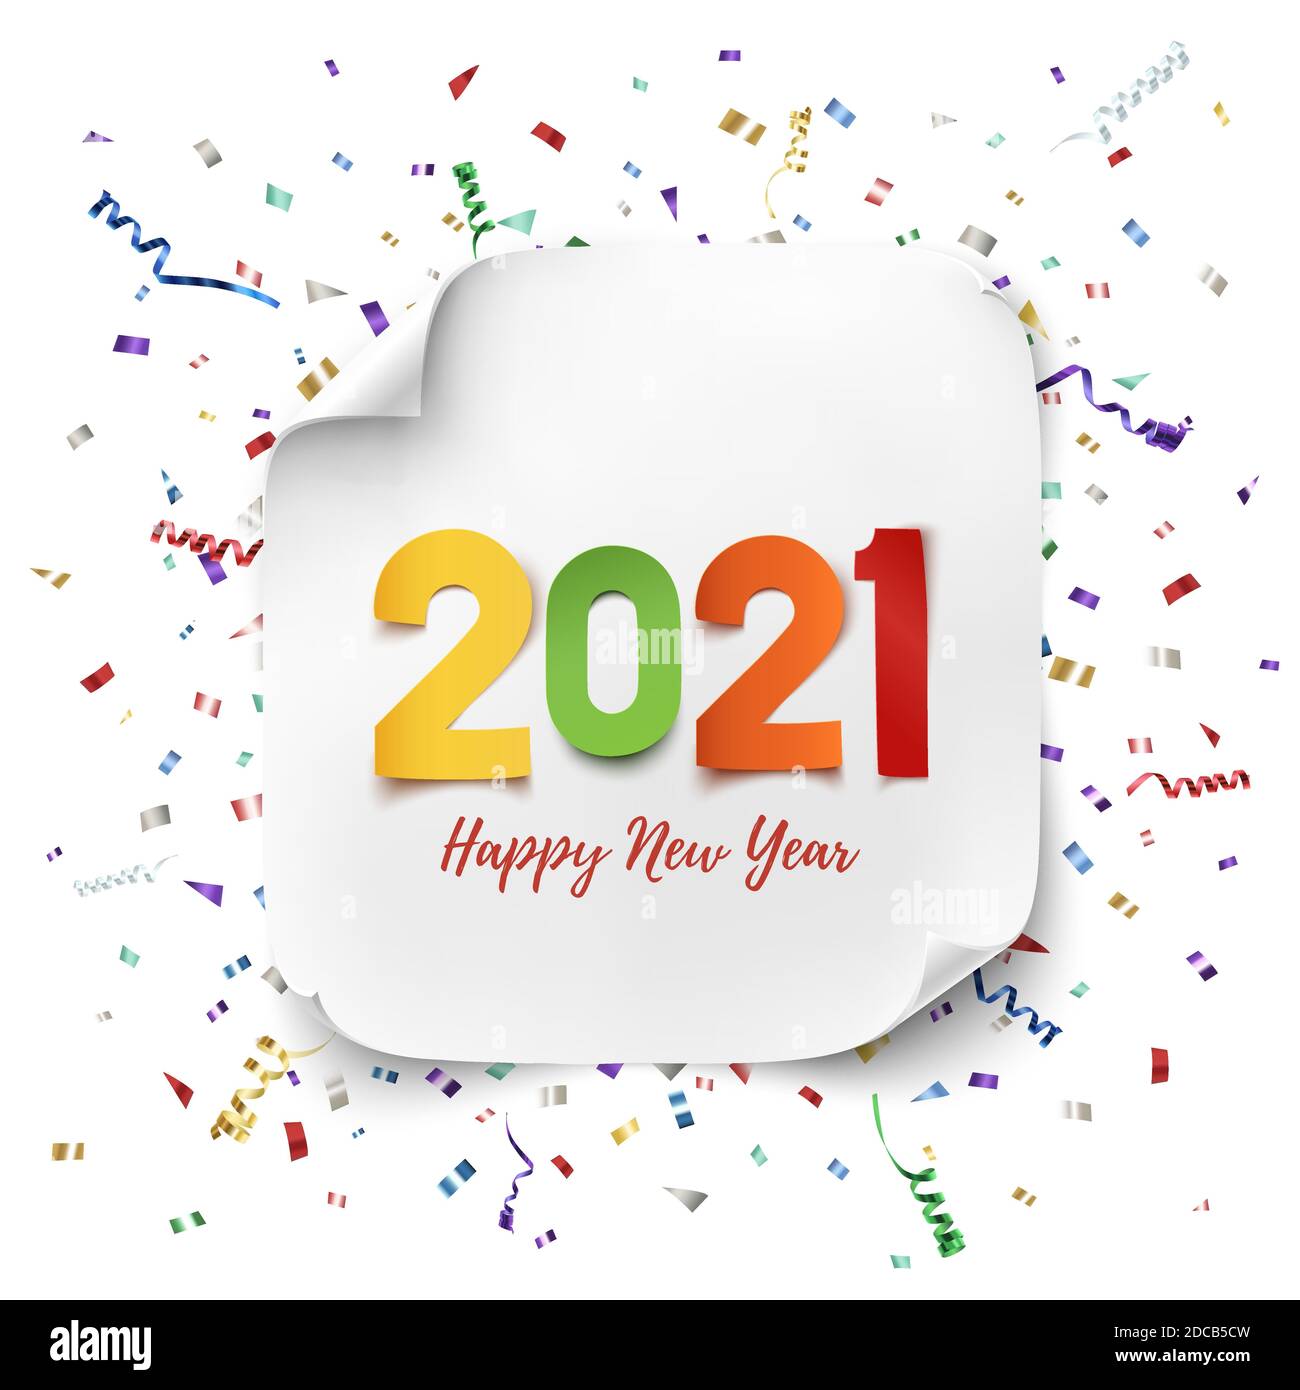 Frohes Neues Jahr 2021. Farbenfrohes Papier-Abdtract-Design. Stock Vektor